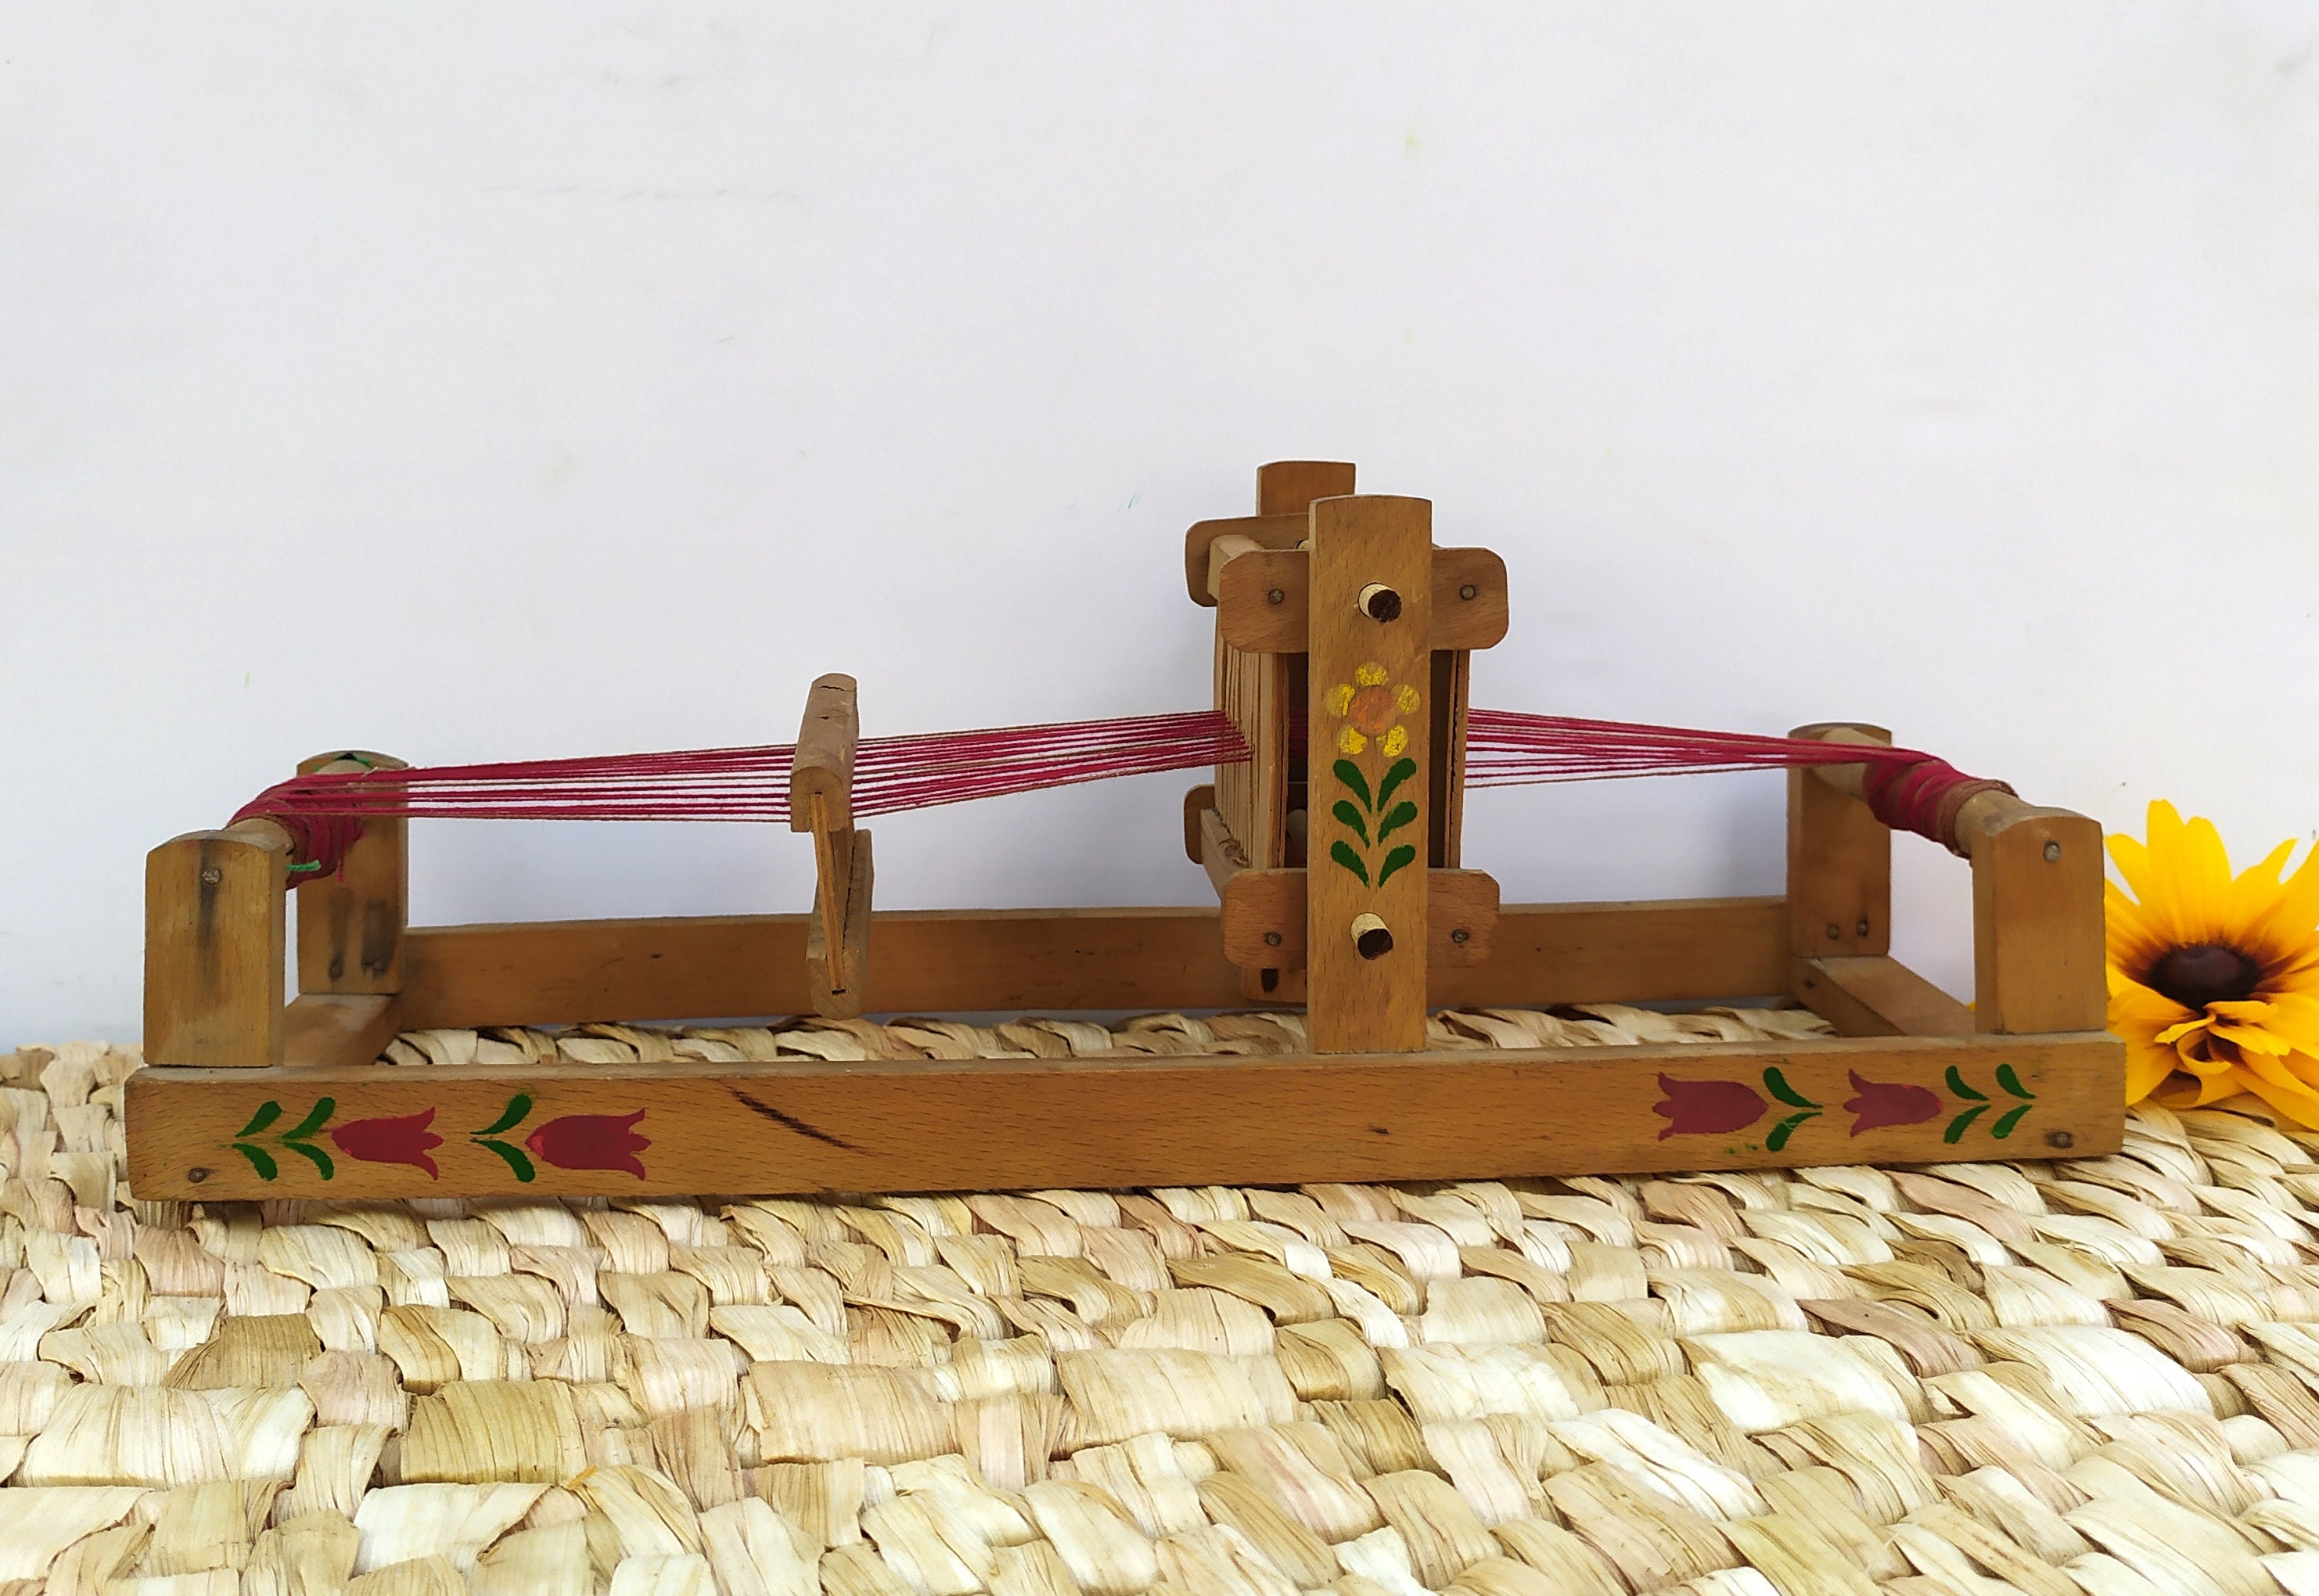 An Upright Bead Loom Making It Easier for Those Who Find A Flat Loom  Difficult to Use. the Kit Contains Everything You Need to Get Started. 